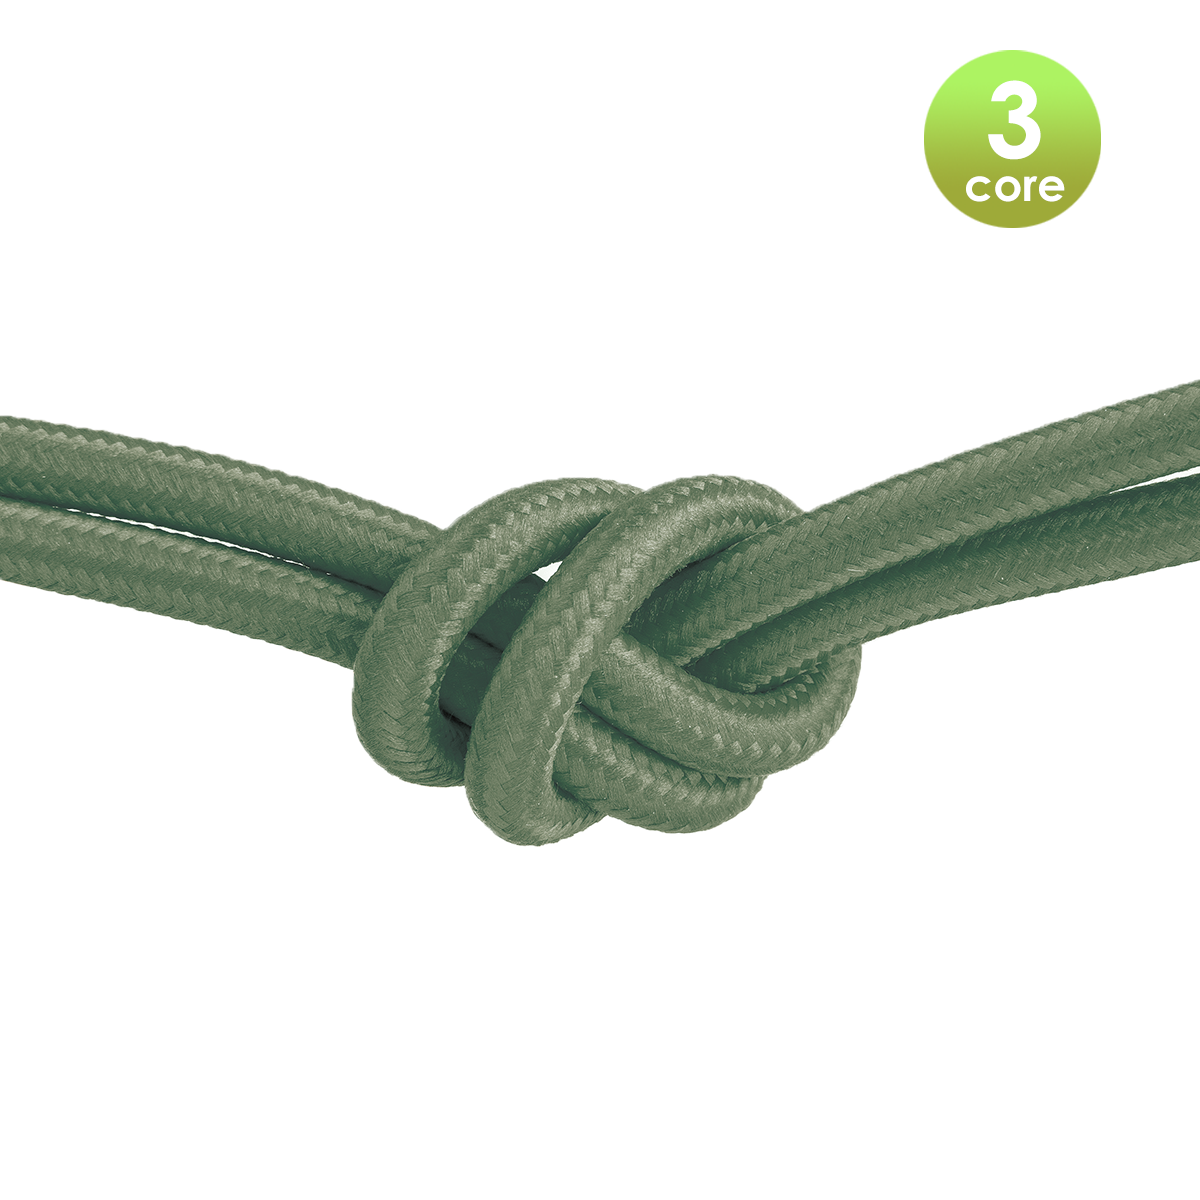 Tangla lighting - TLCB01016GN - 3c - Fabric cable 3 core - in fern green